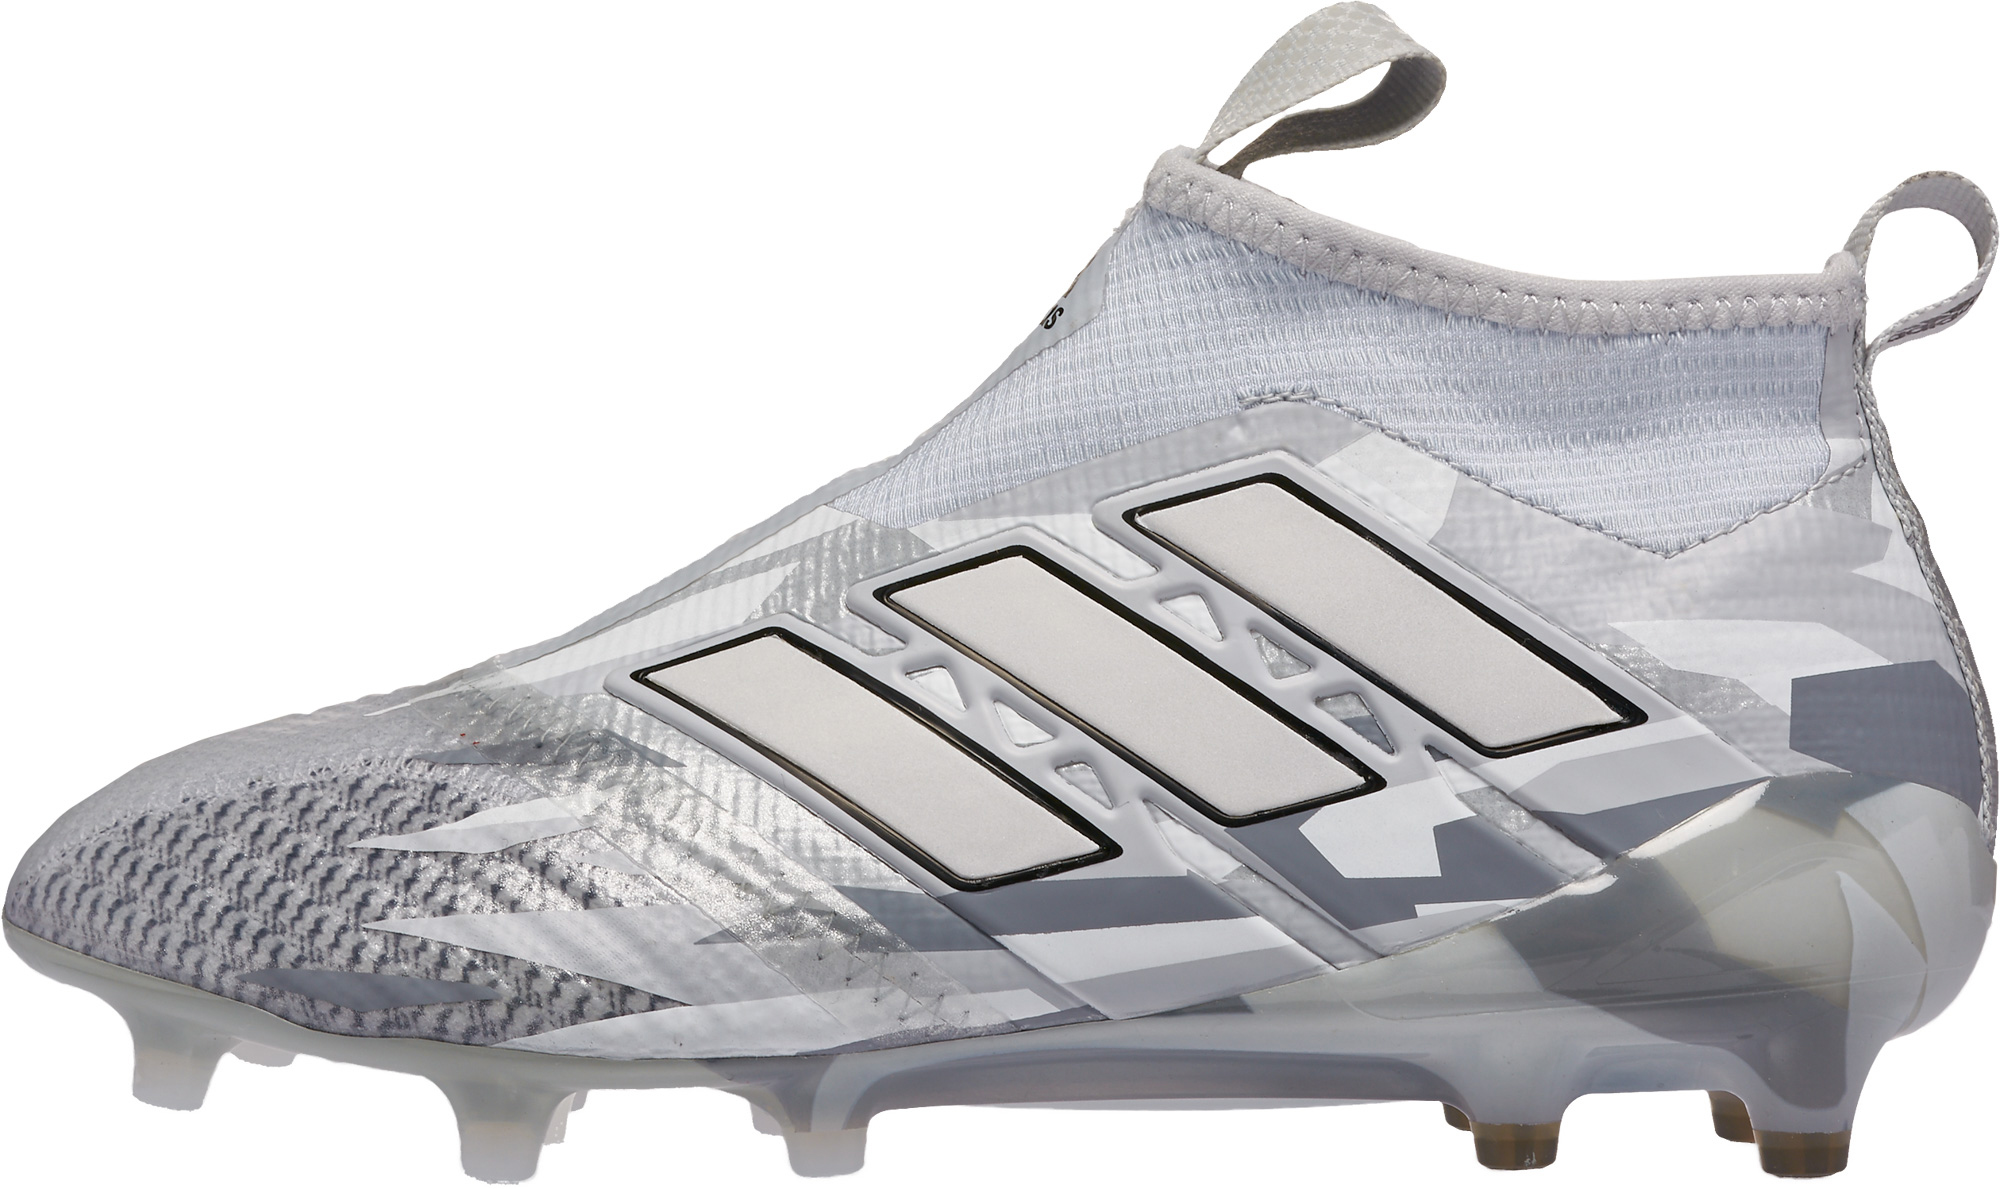 adidas ACE 17 Purecontrol FG - Grey ACE Soccer Cleats